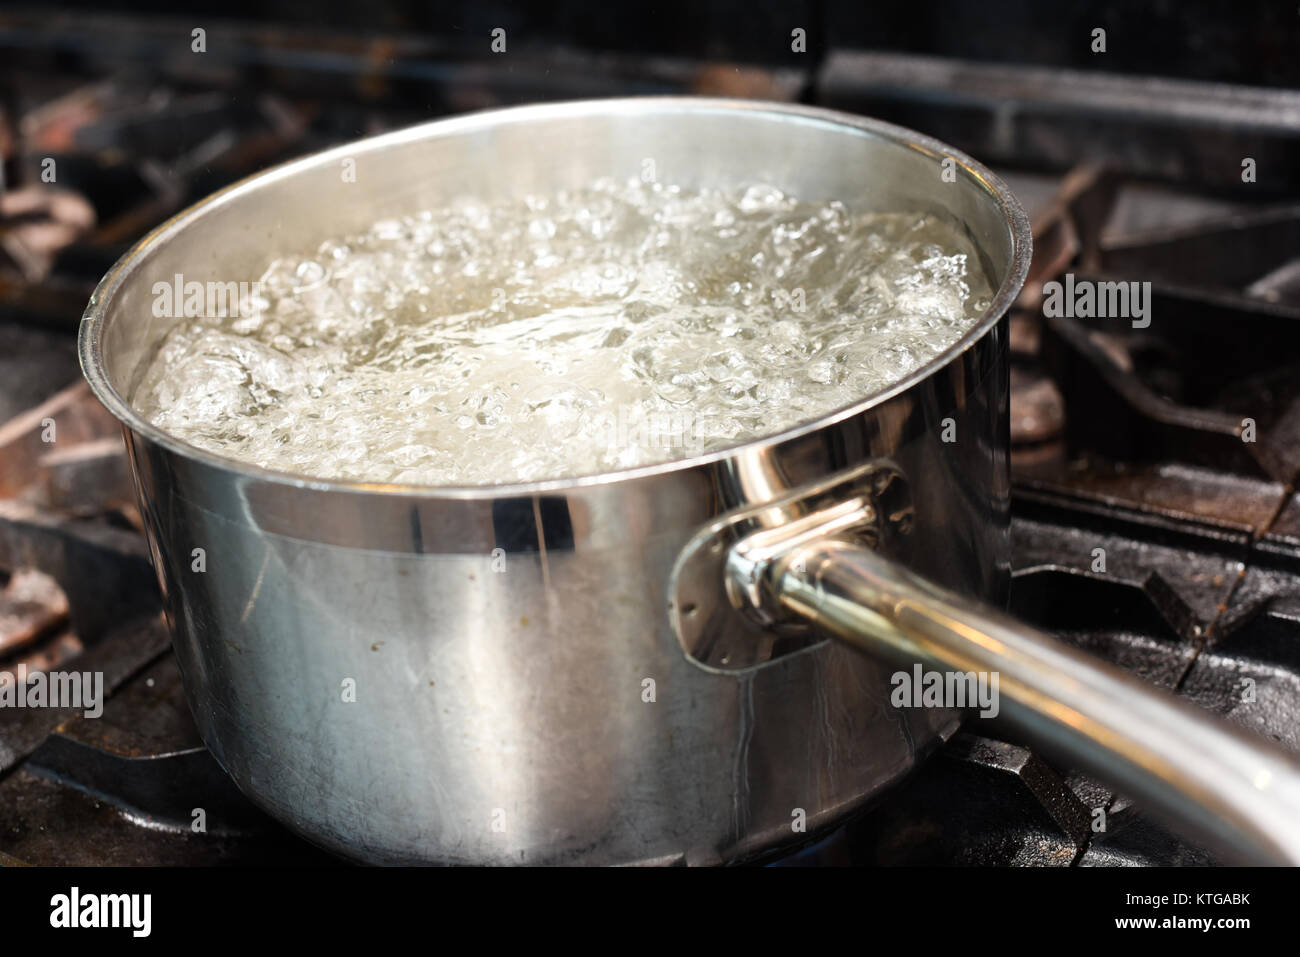 Water boiling in a pan on a range Stock Photo